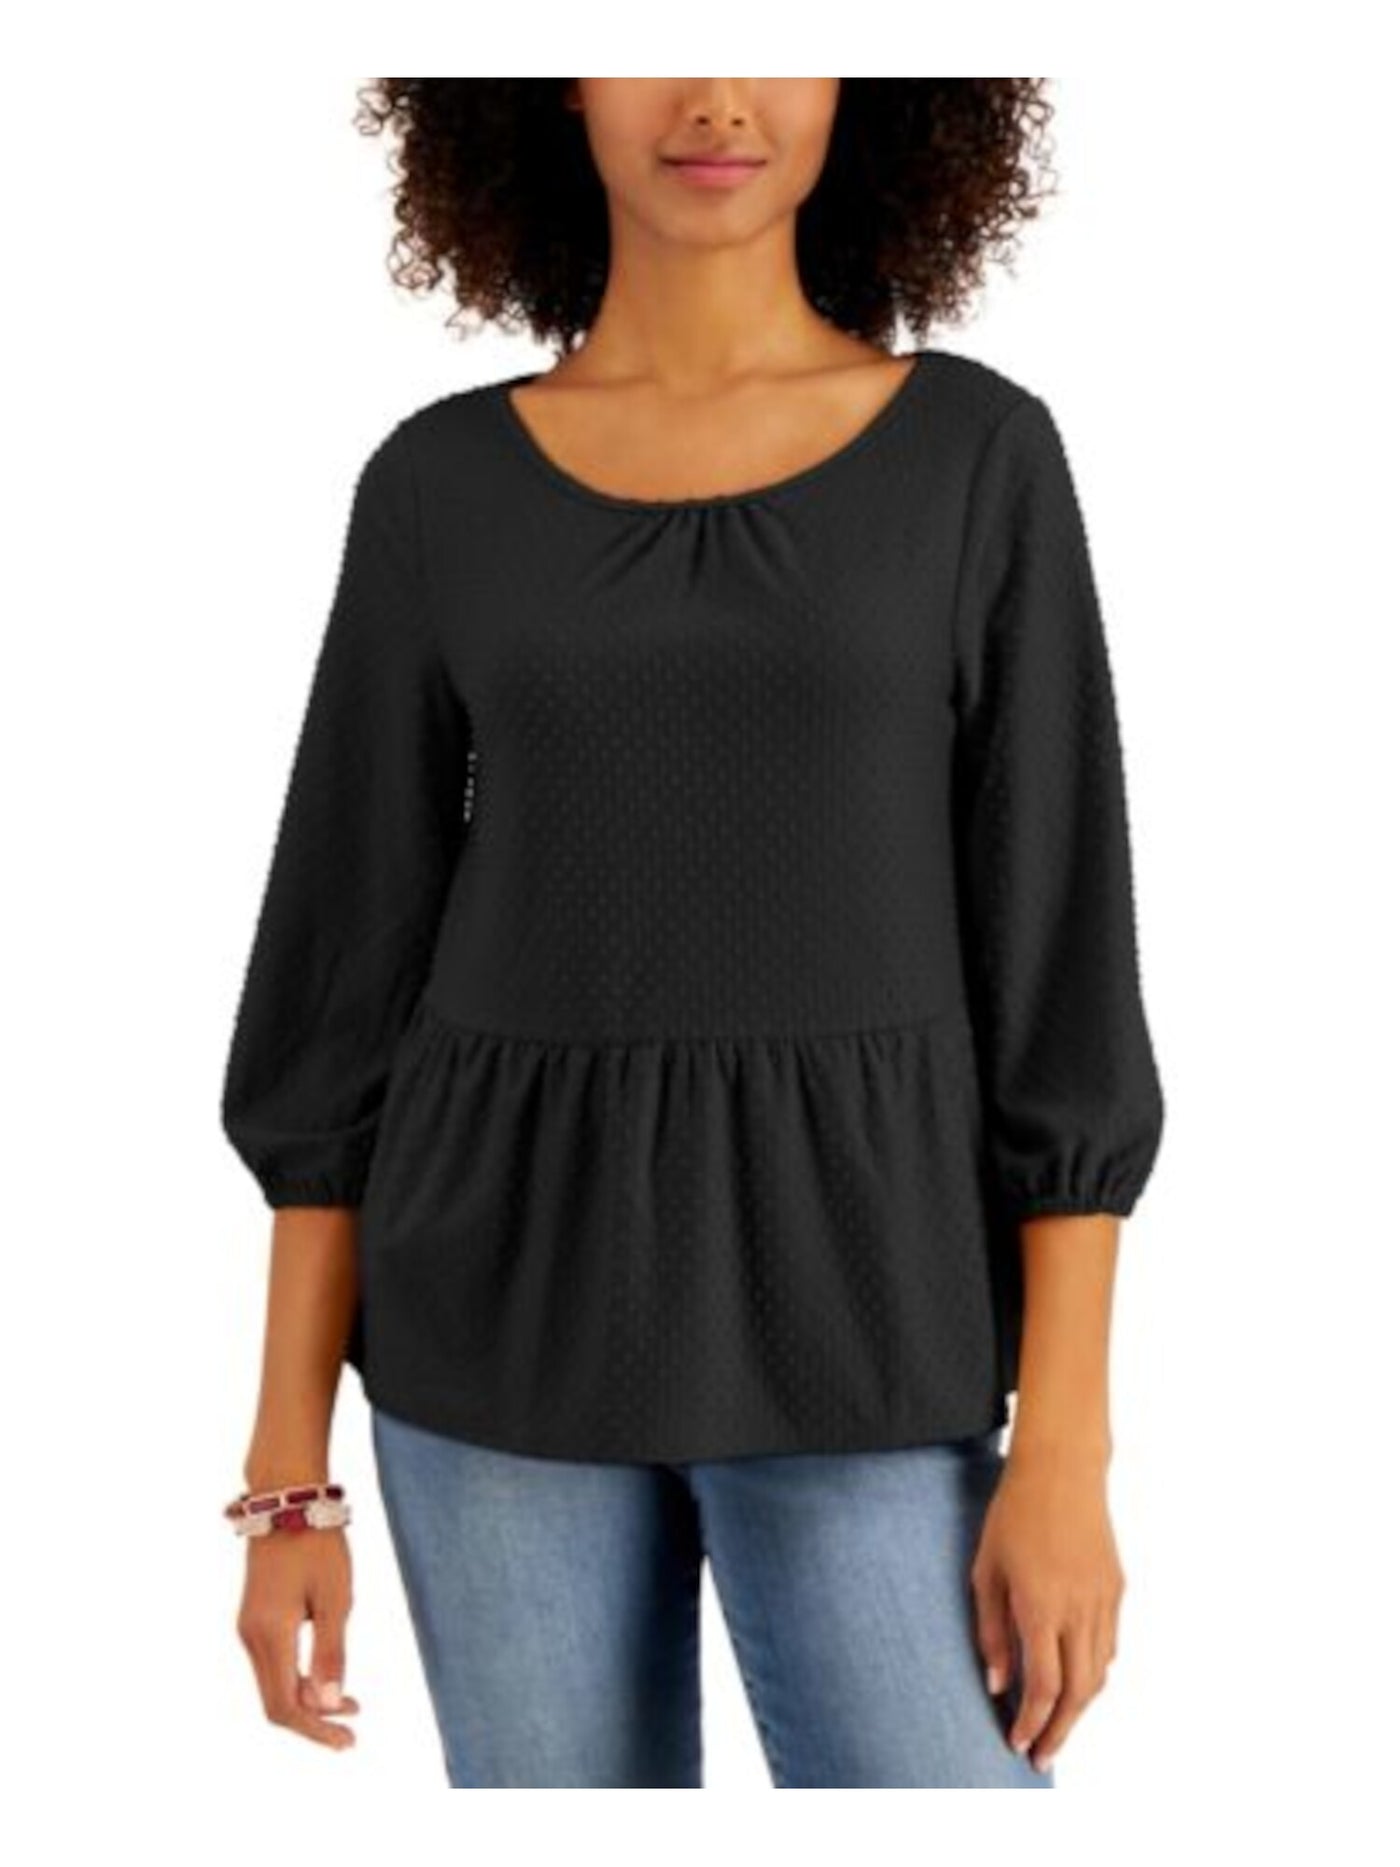 STYLE & COMPANY Womens Black 3/4 Sleeve Top Size: XS